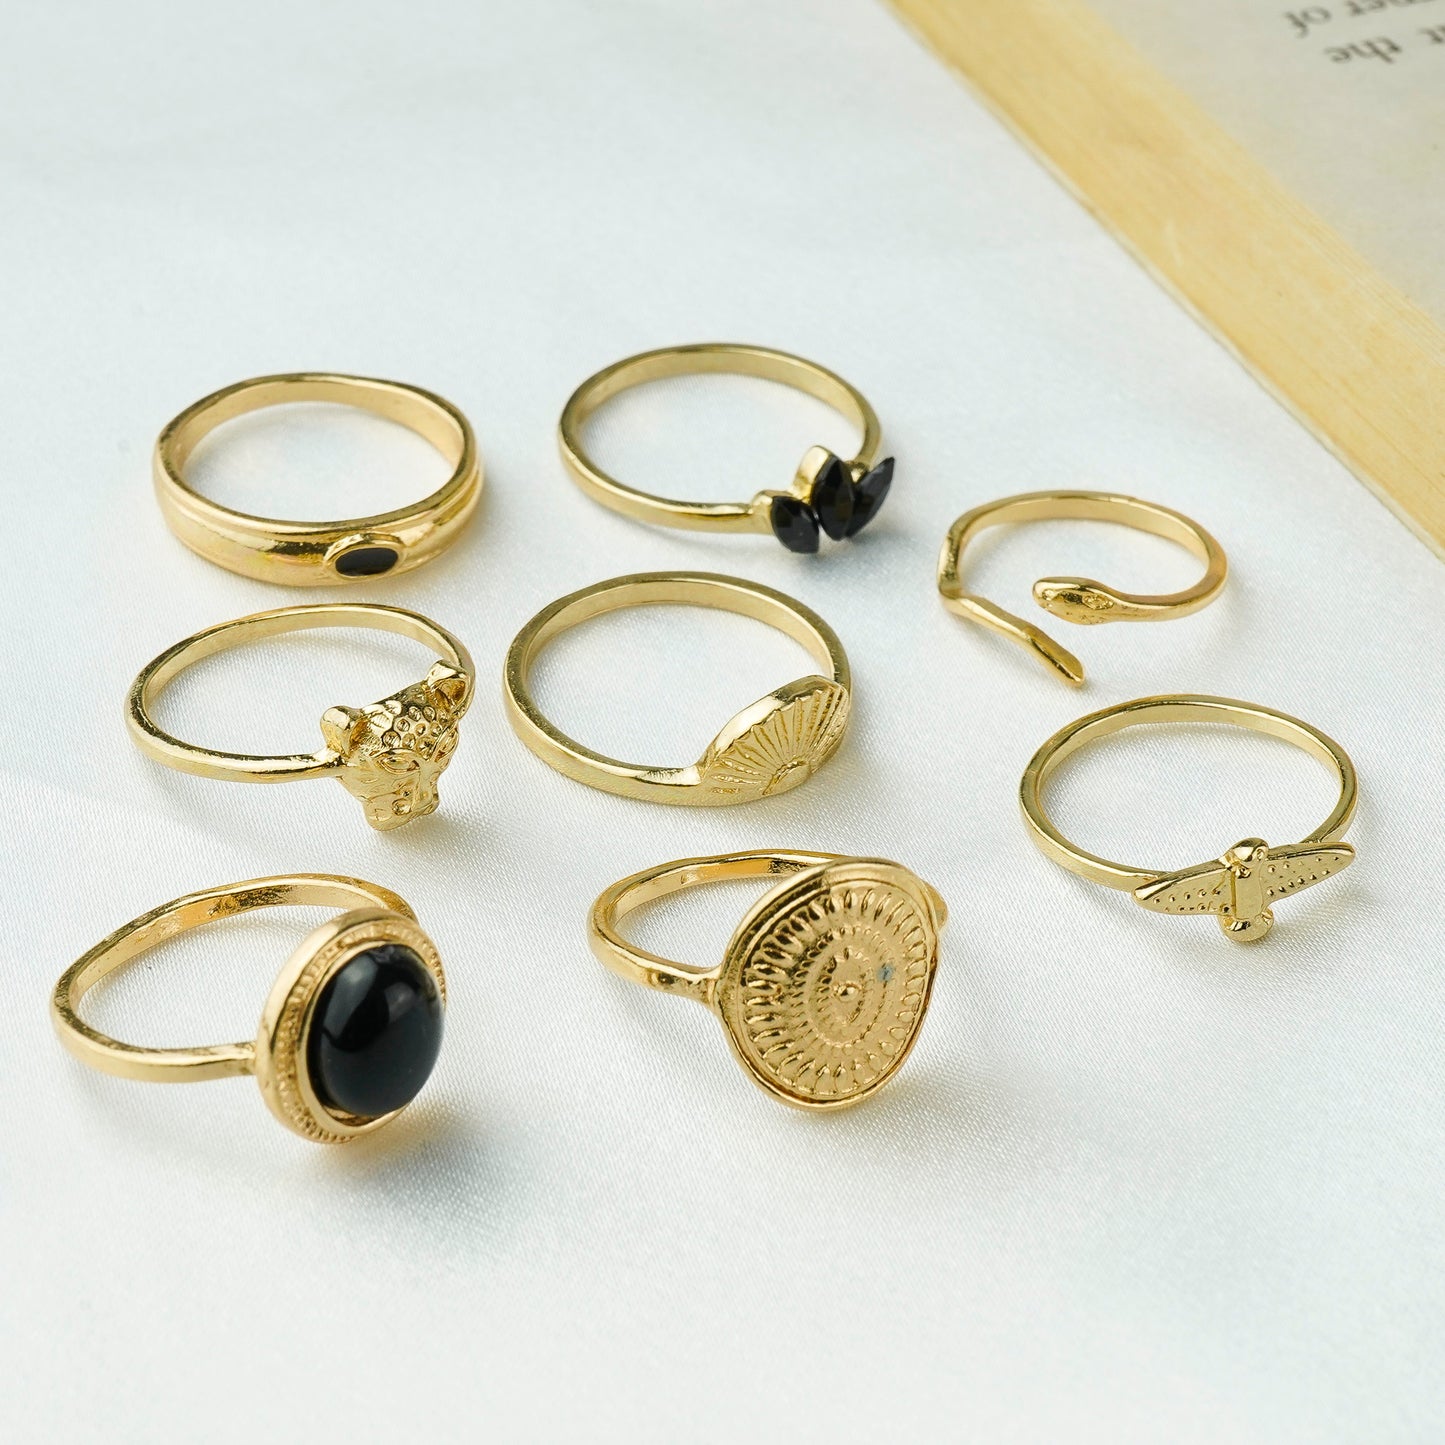 Trendy Set Ring For Fashionable Women(Code:R44)